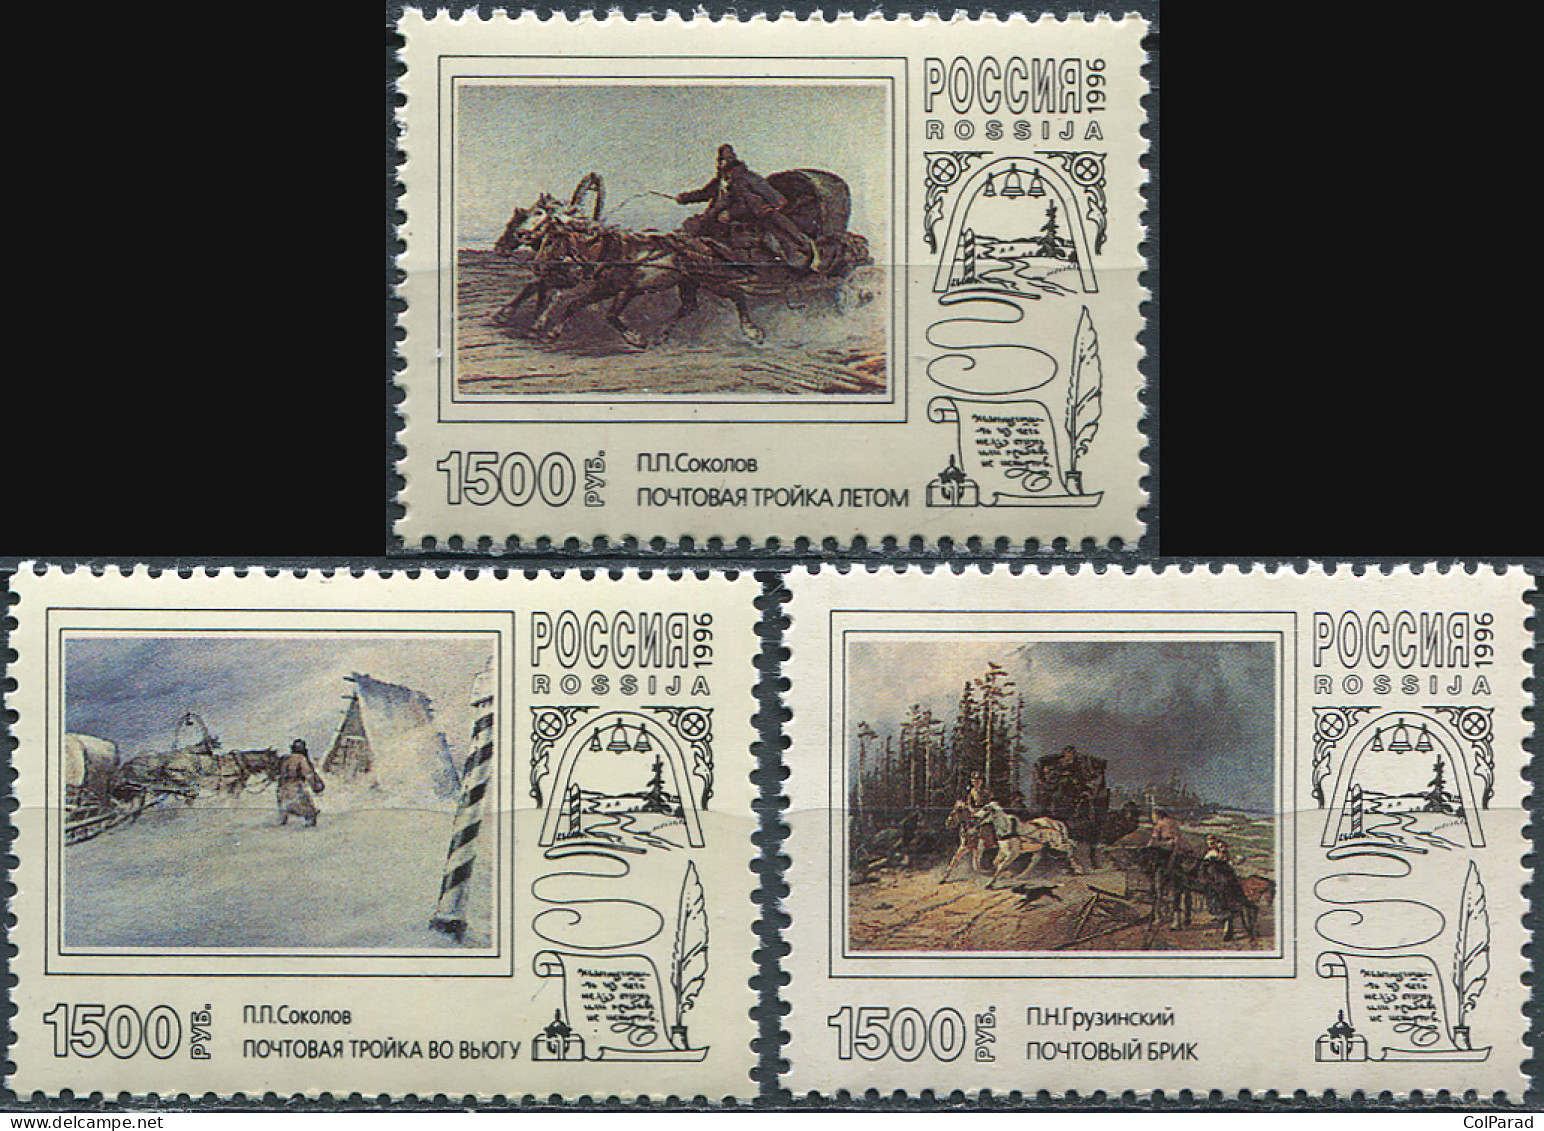 RUSSIA - 1996 - SET OF 3 STAMPS MNH ** - Postal Troikas In Paintings - Ungebraucht